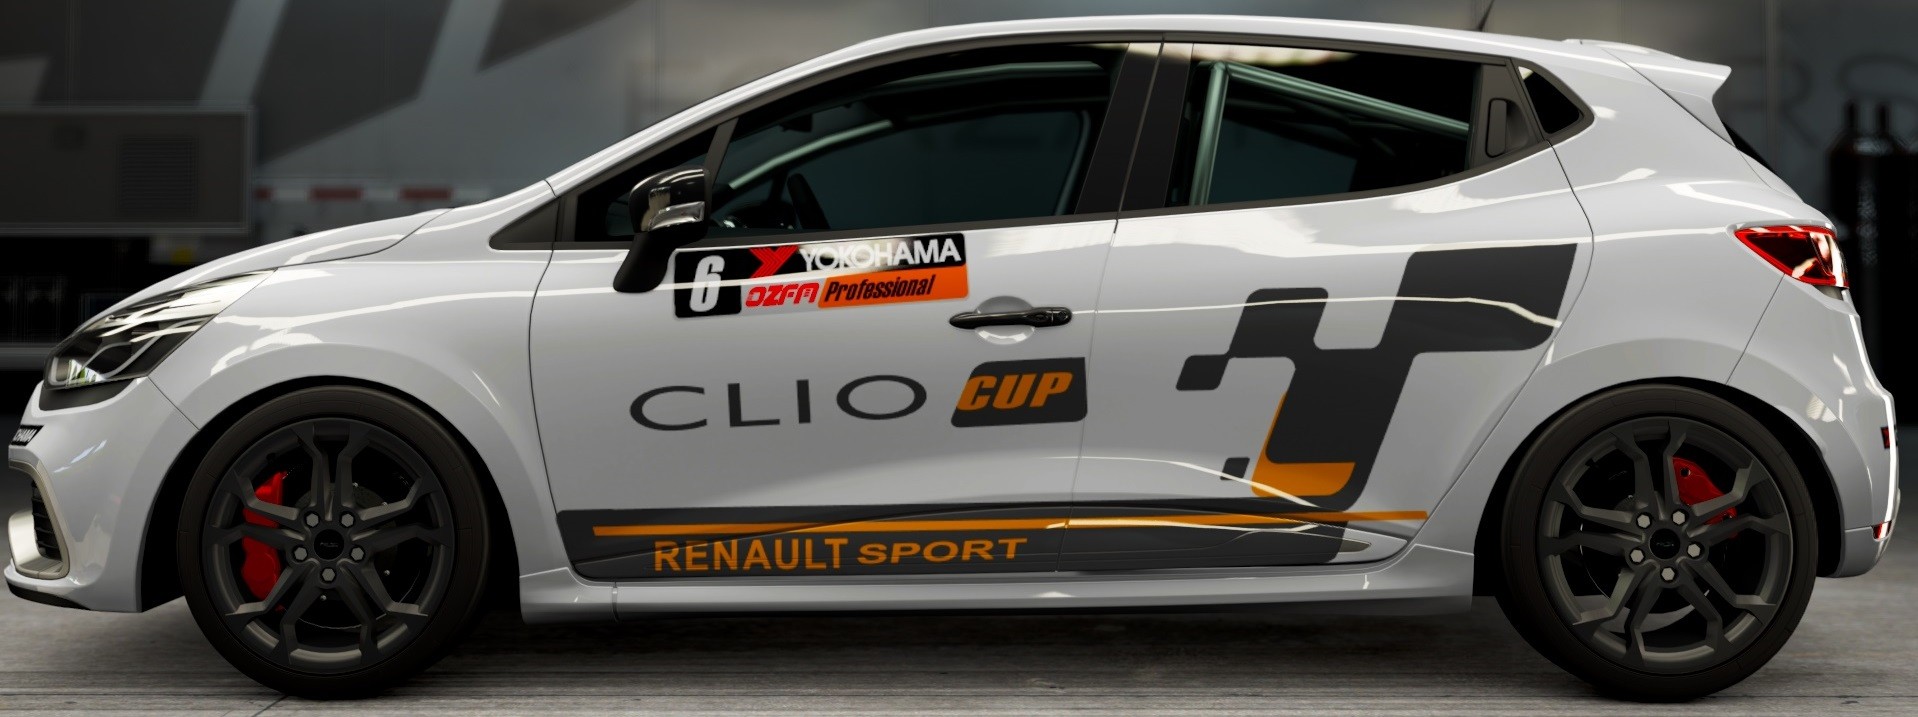 Clio Cup Livery Guidelines Clioli10